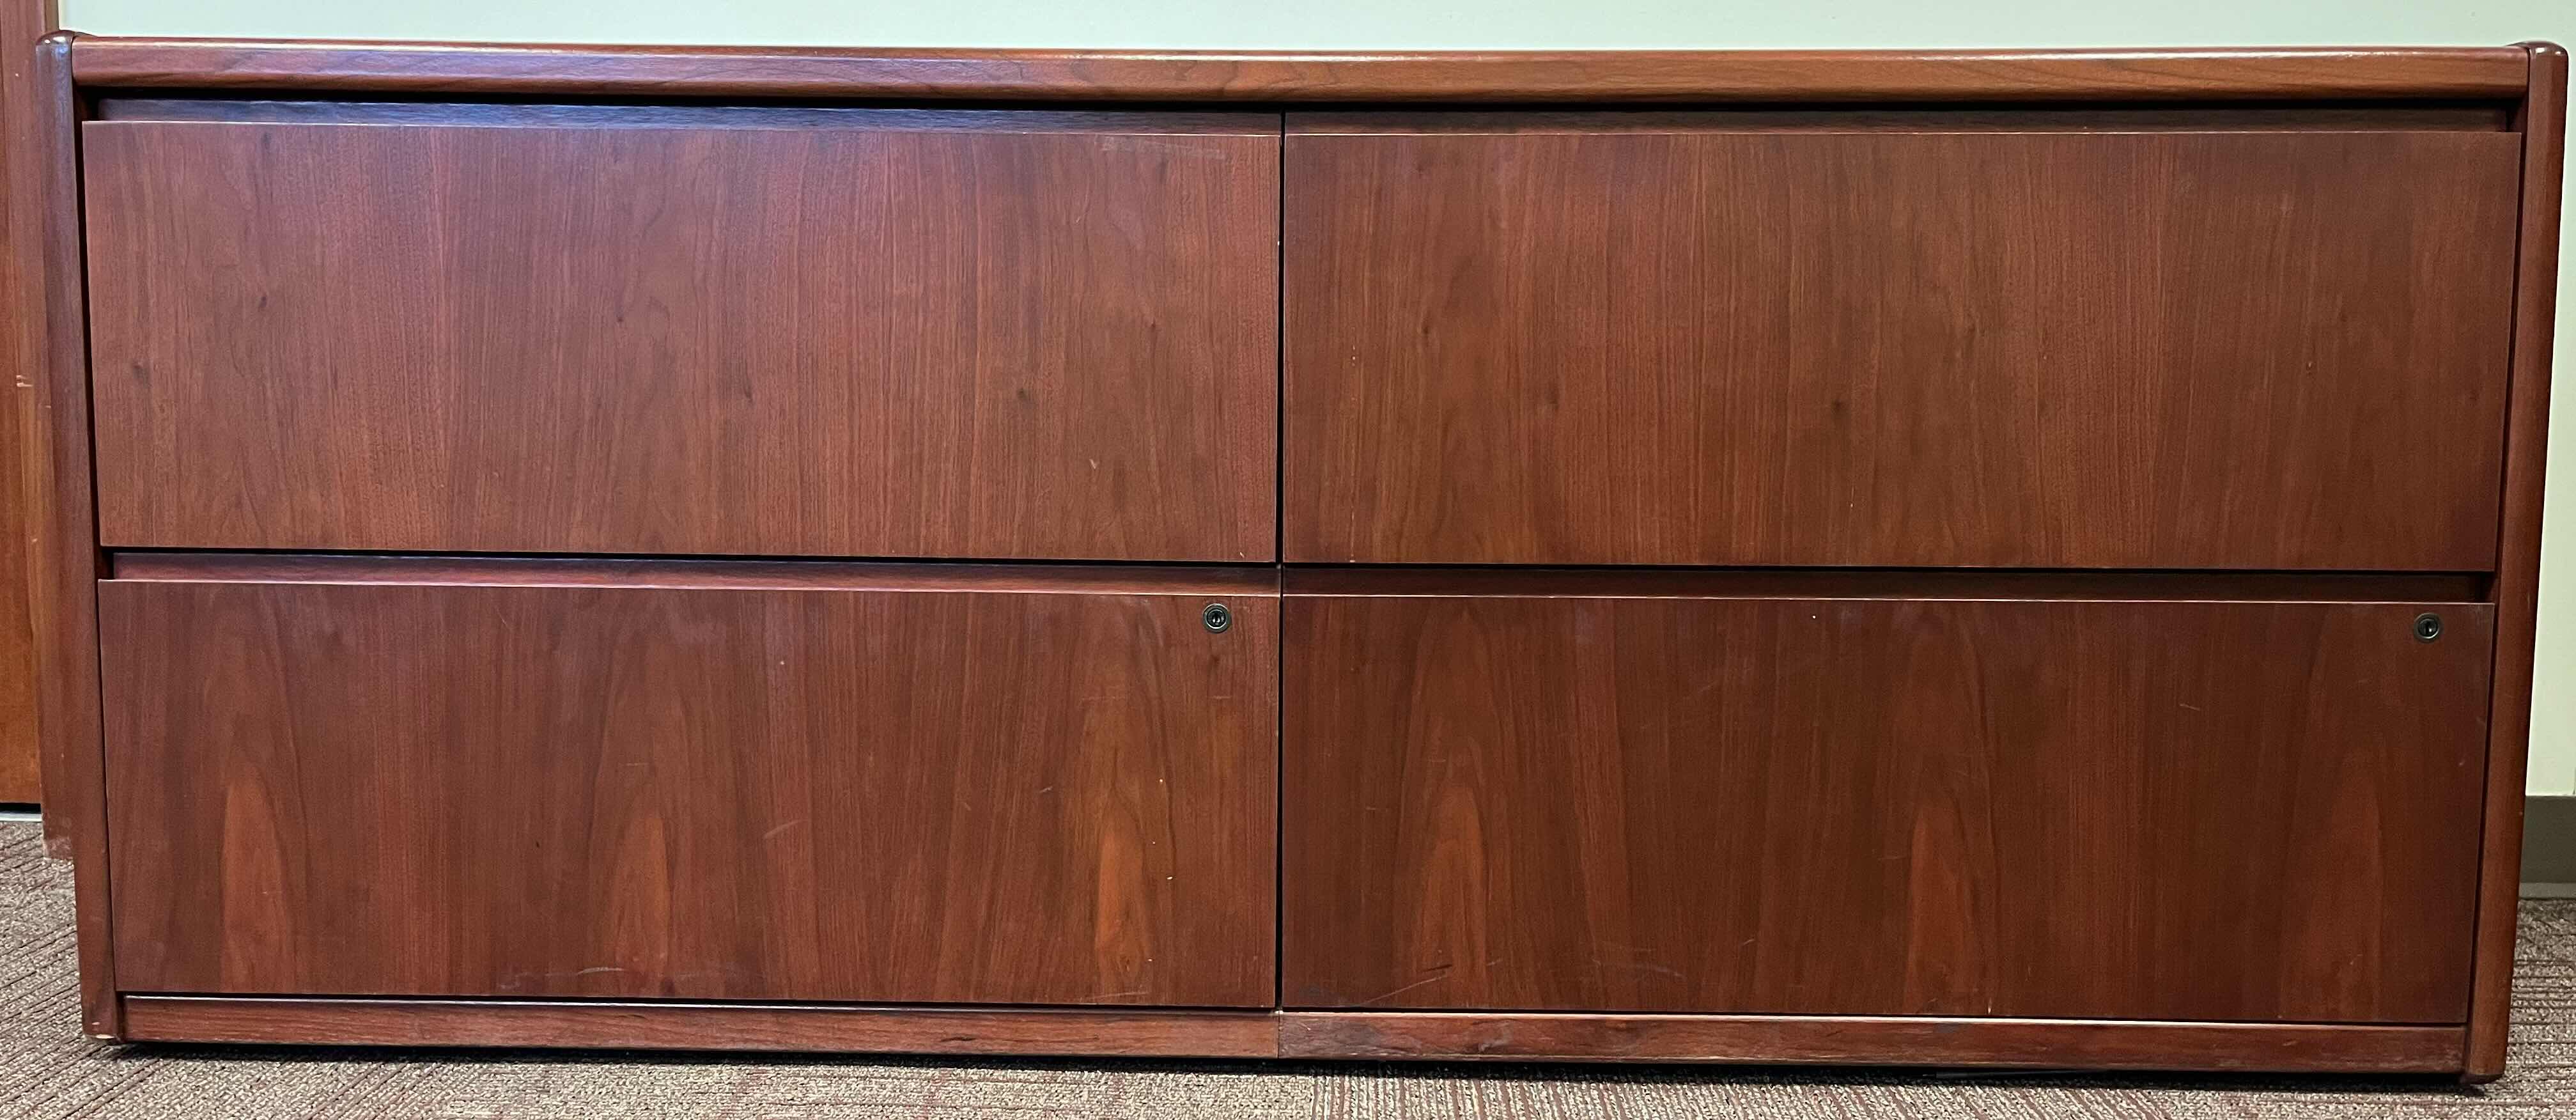 Photo 1 of CHERRY WOOD FINISH LATERAL FILE CABINET 70” X 20” H30”